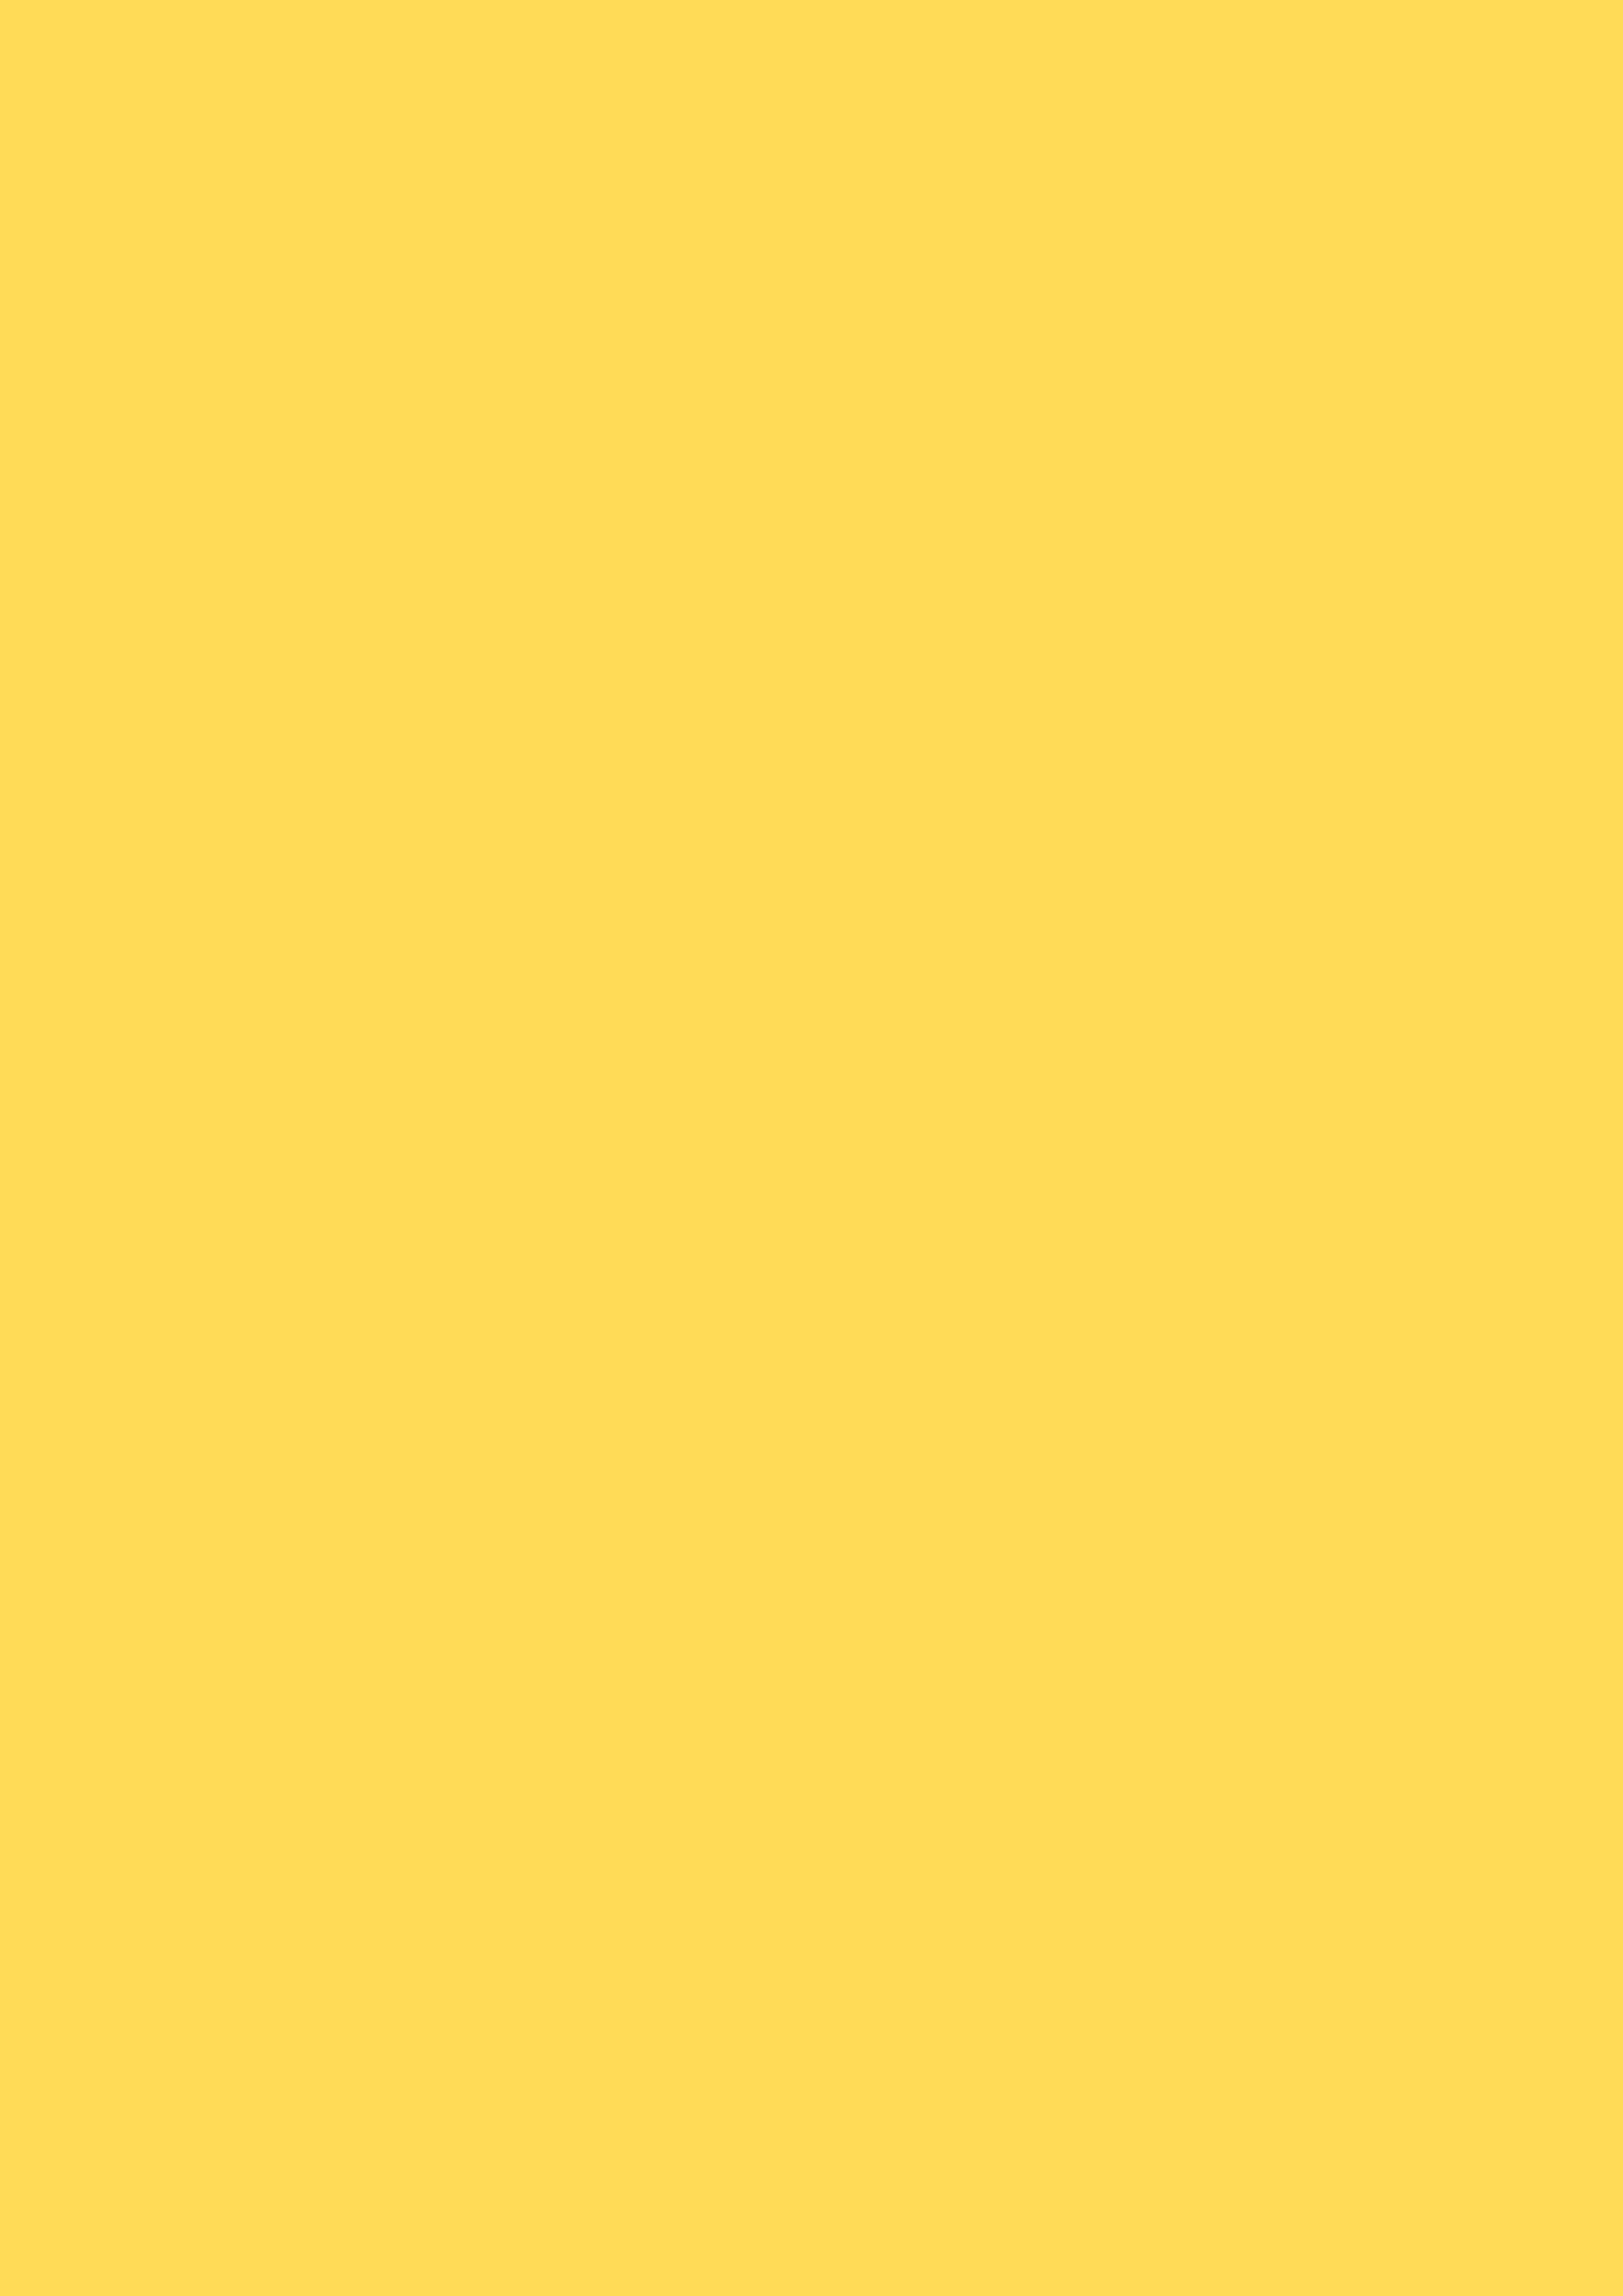 2480x3508 Mustard Solid Color Background